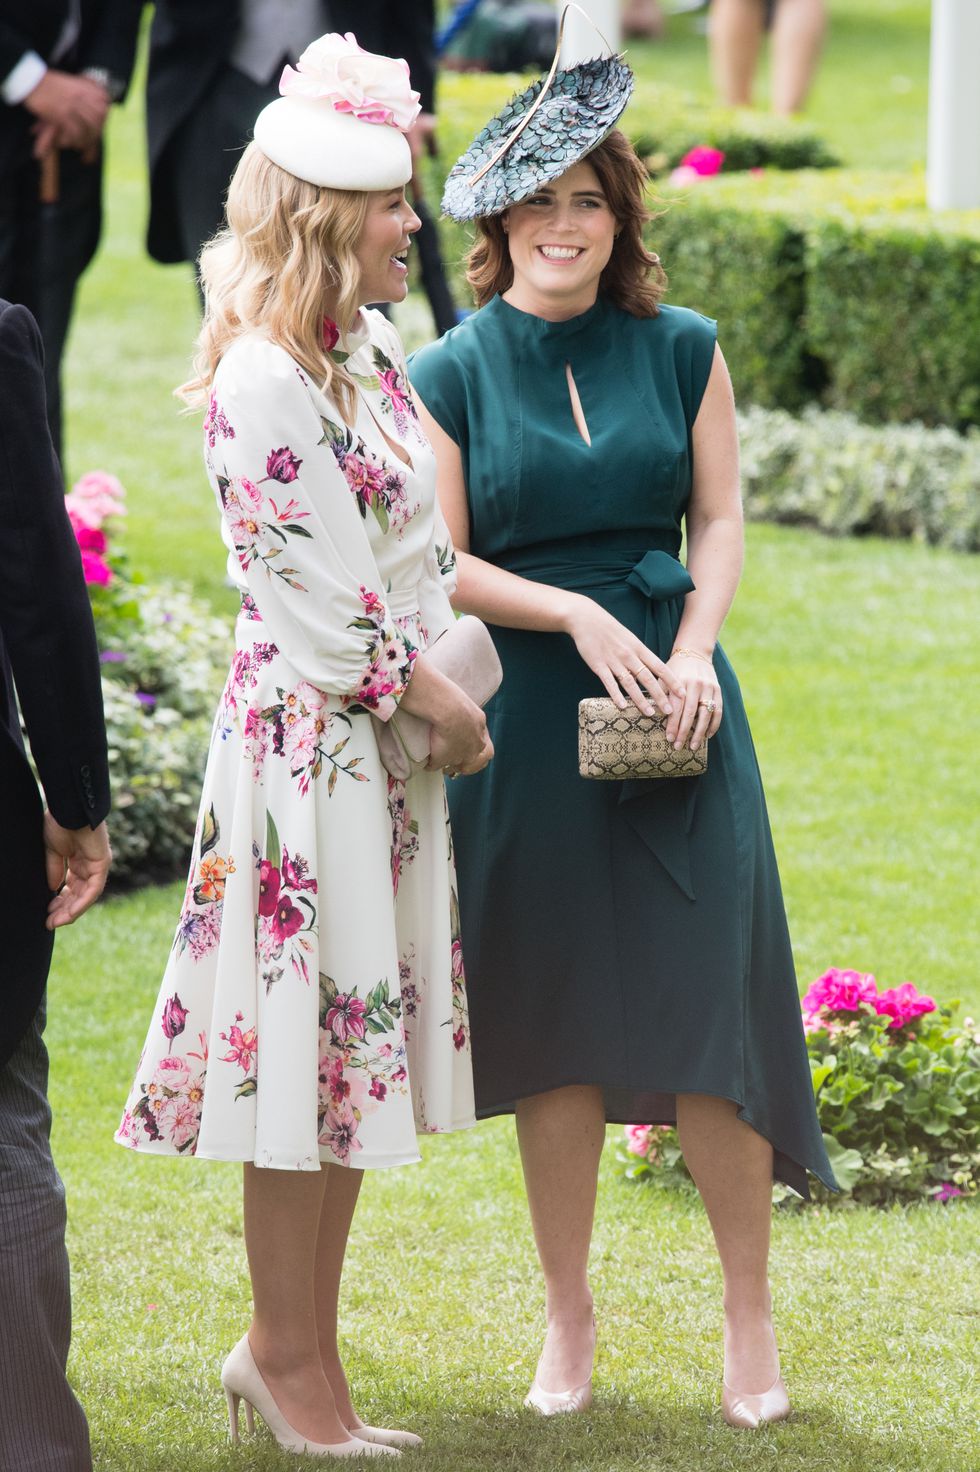 princess-eugenie-of-york-and-autumn-phillips-attends-day-news-photo-1157152187-1561044624.jpg